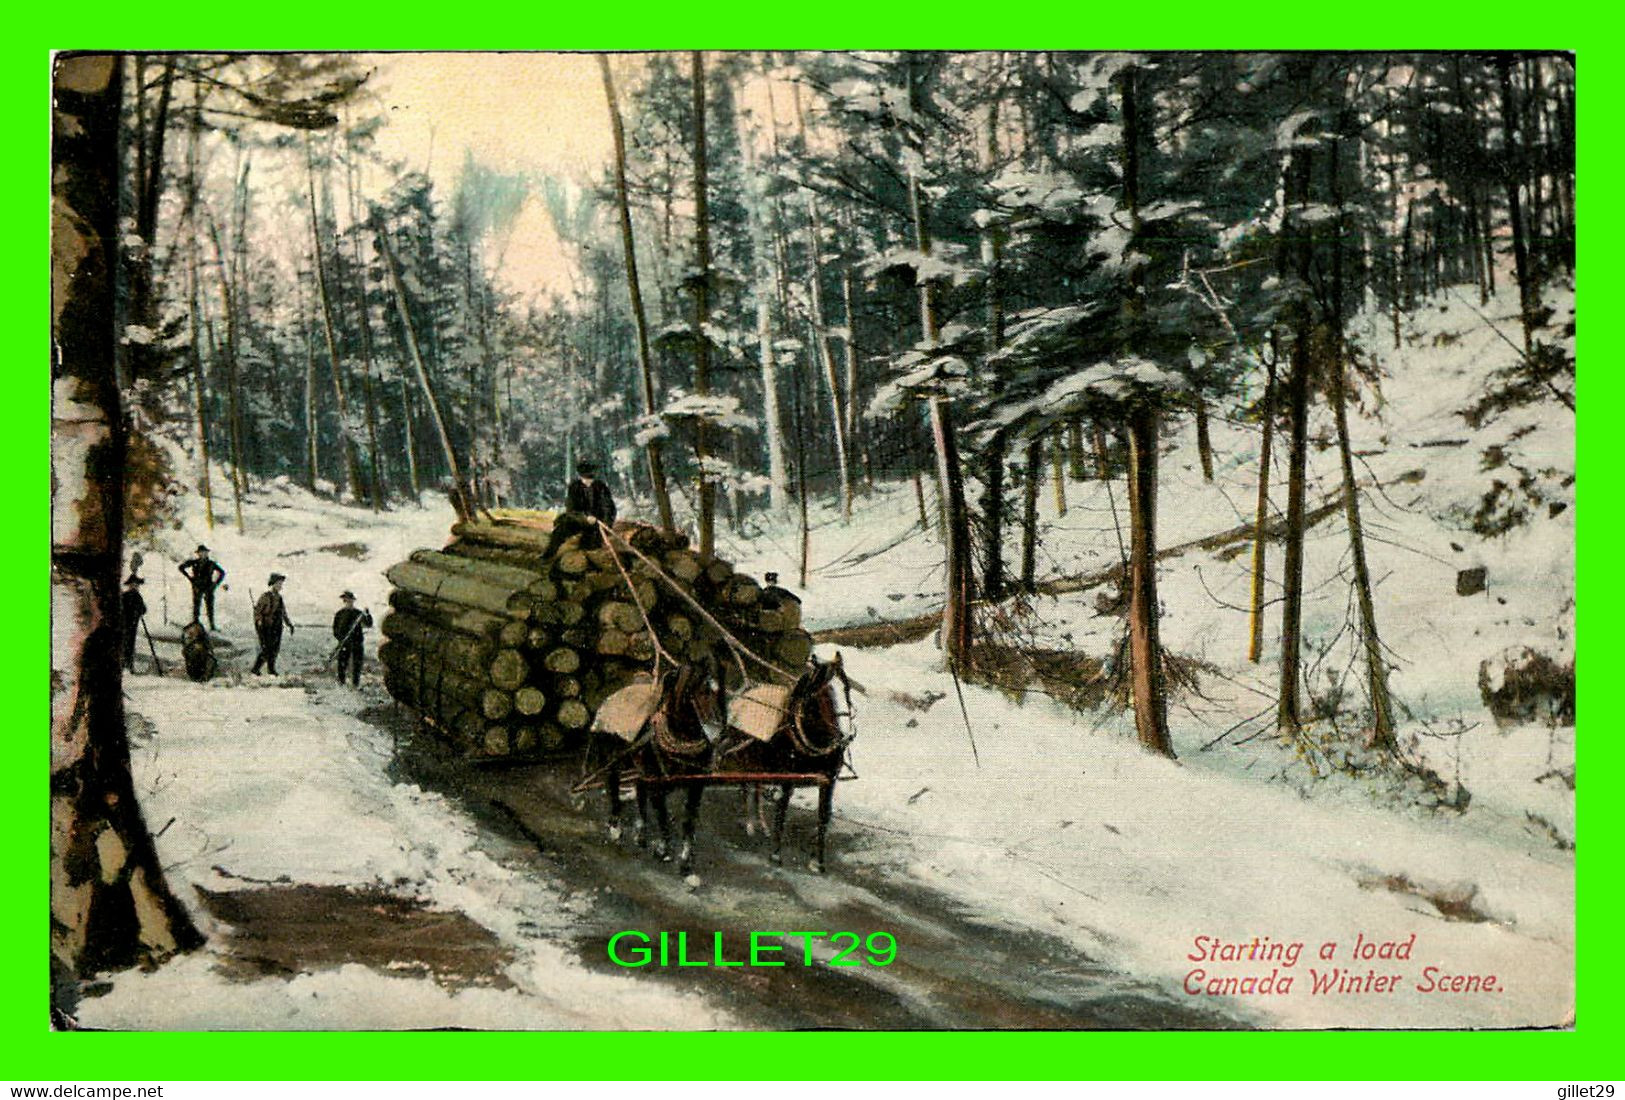 HAMILTON, ONTARIO - PEOPLES STARTING A LOAD OF WOODS - CANADA WINTER SCENE - TRAVEL IN 1910 - STEDMAN BROS - - Hamilton